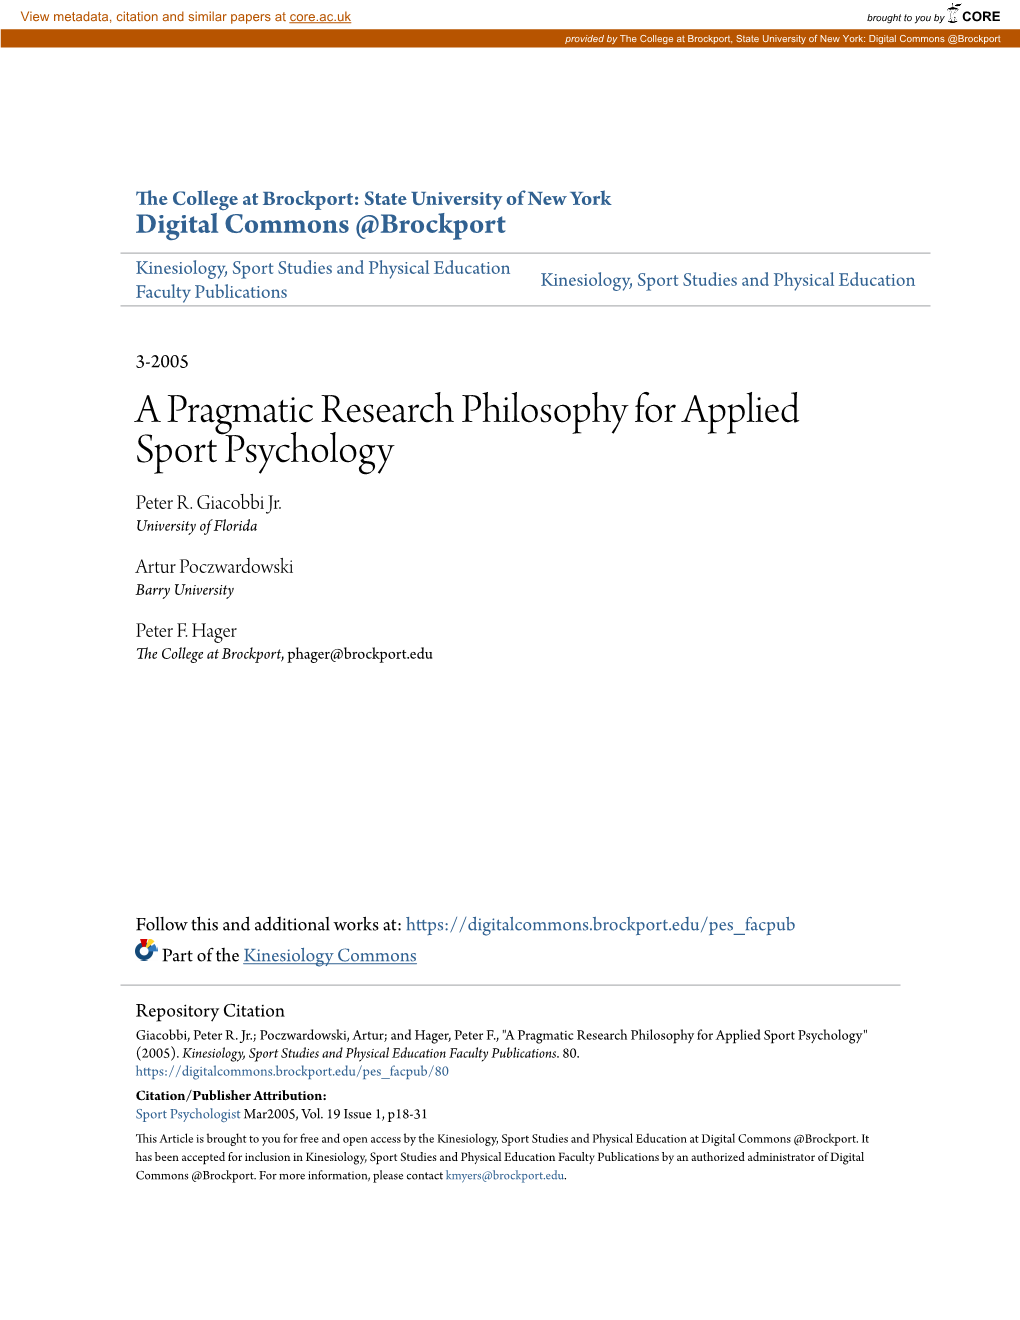 A Pragmatic Research Philosophy for Applied Sport Psychology Peter R